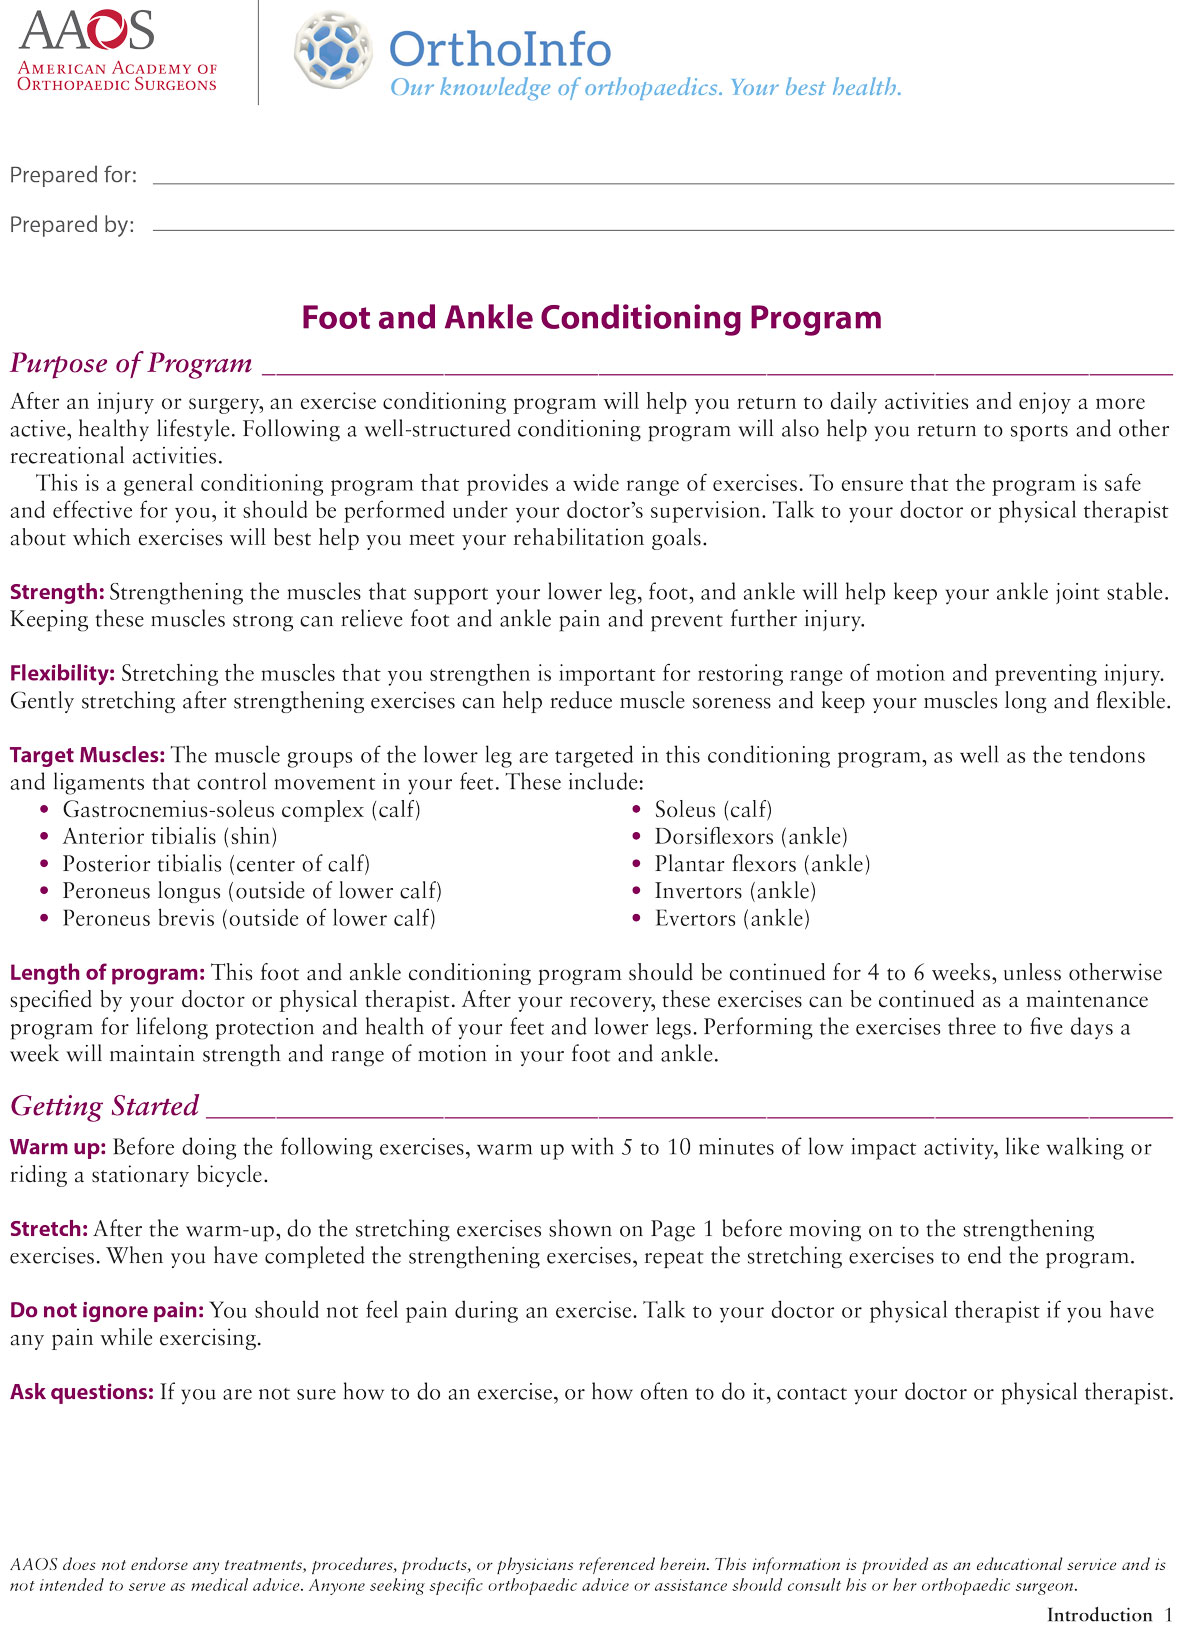 Foot Ankle Conditioning Program